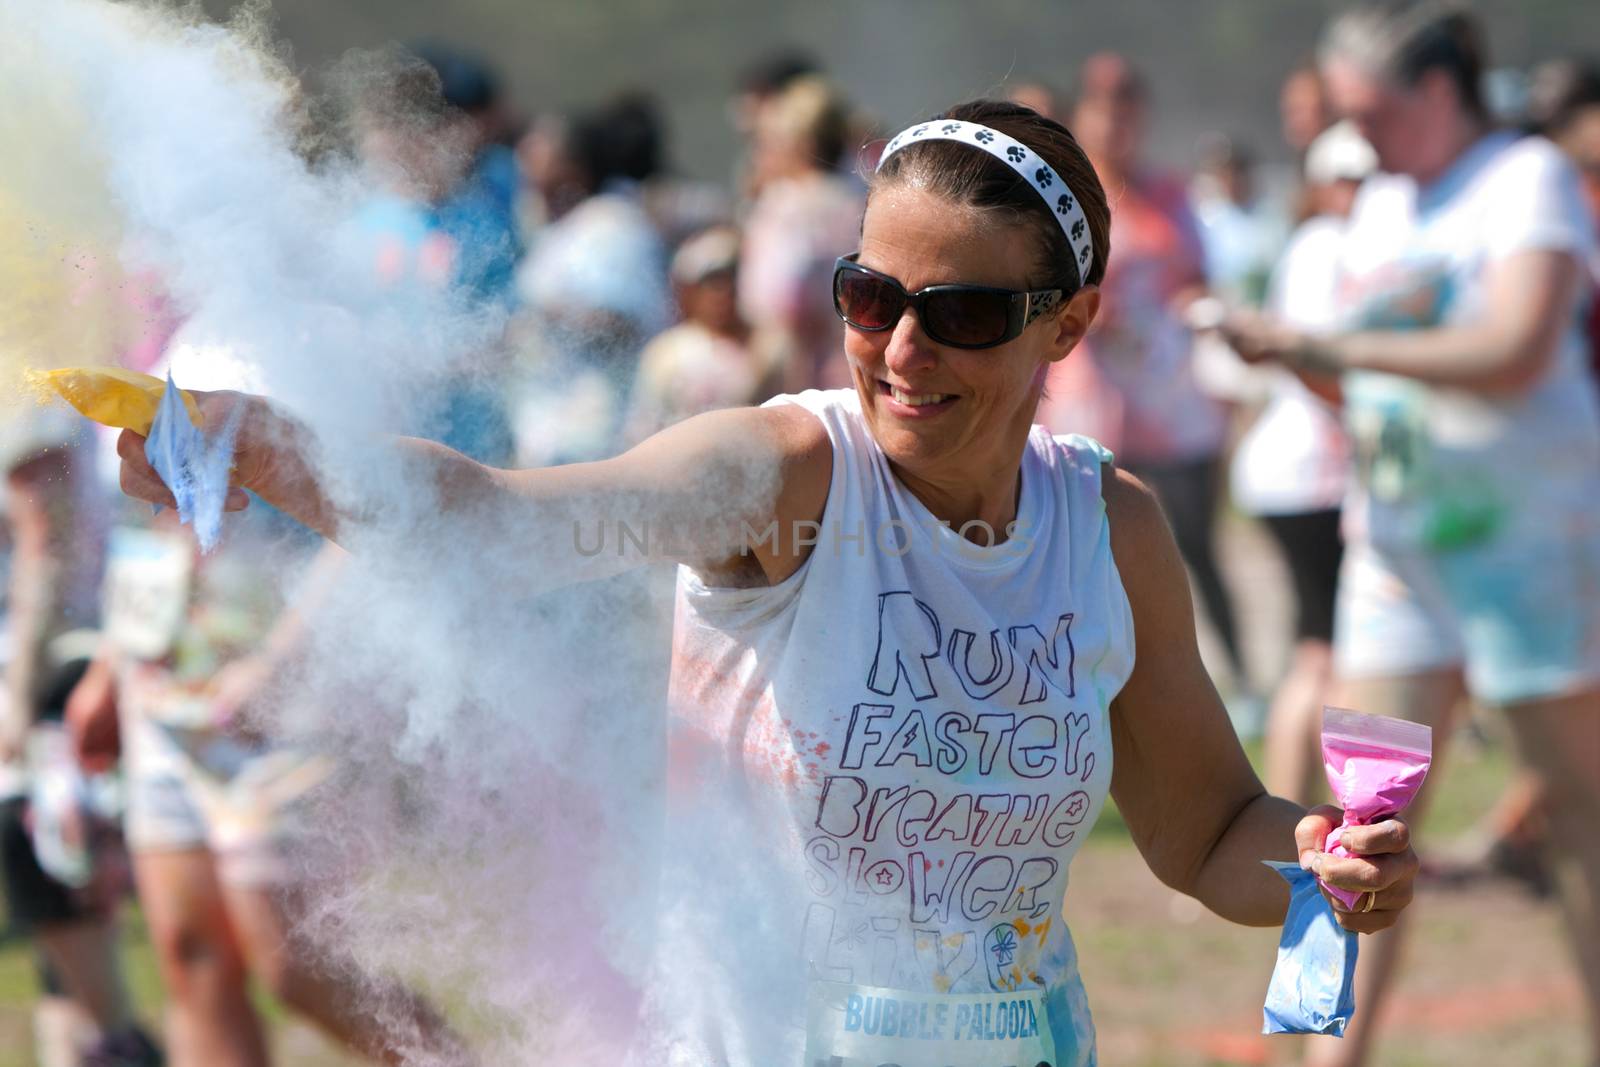 Woman Throws Colored Corn Starch At Bubble Palooza Event by BluIz60